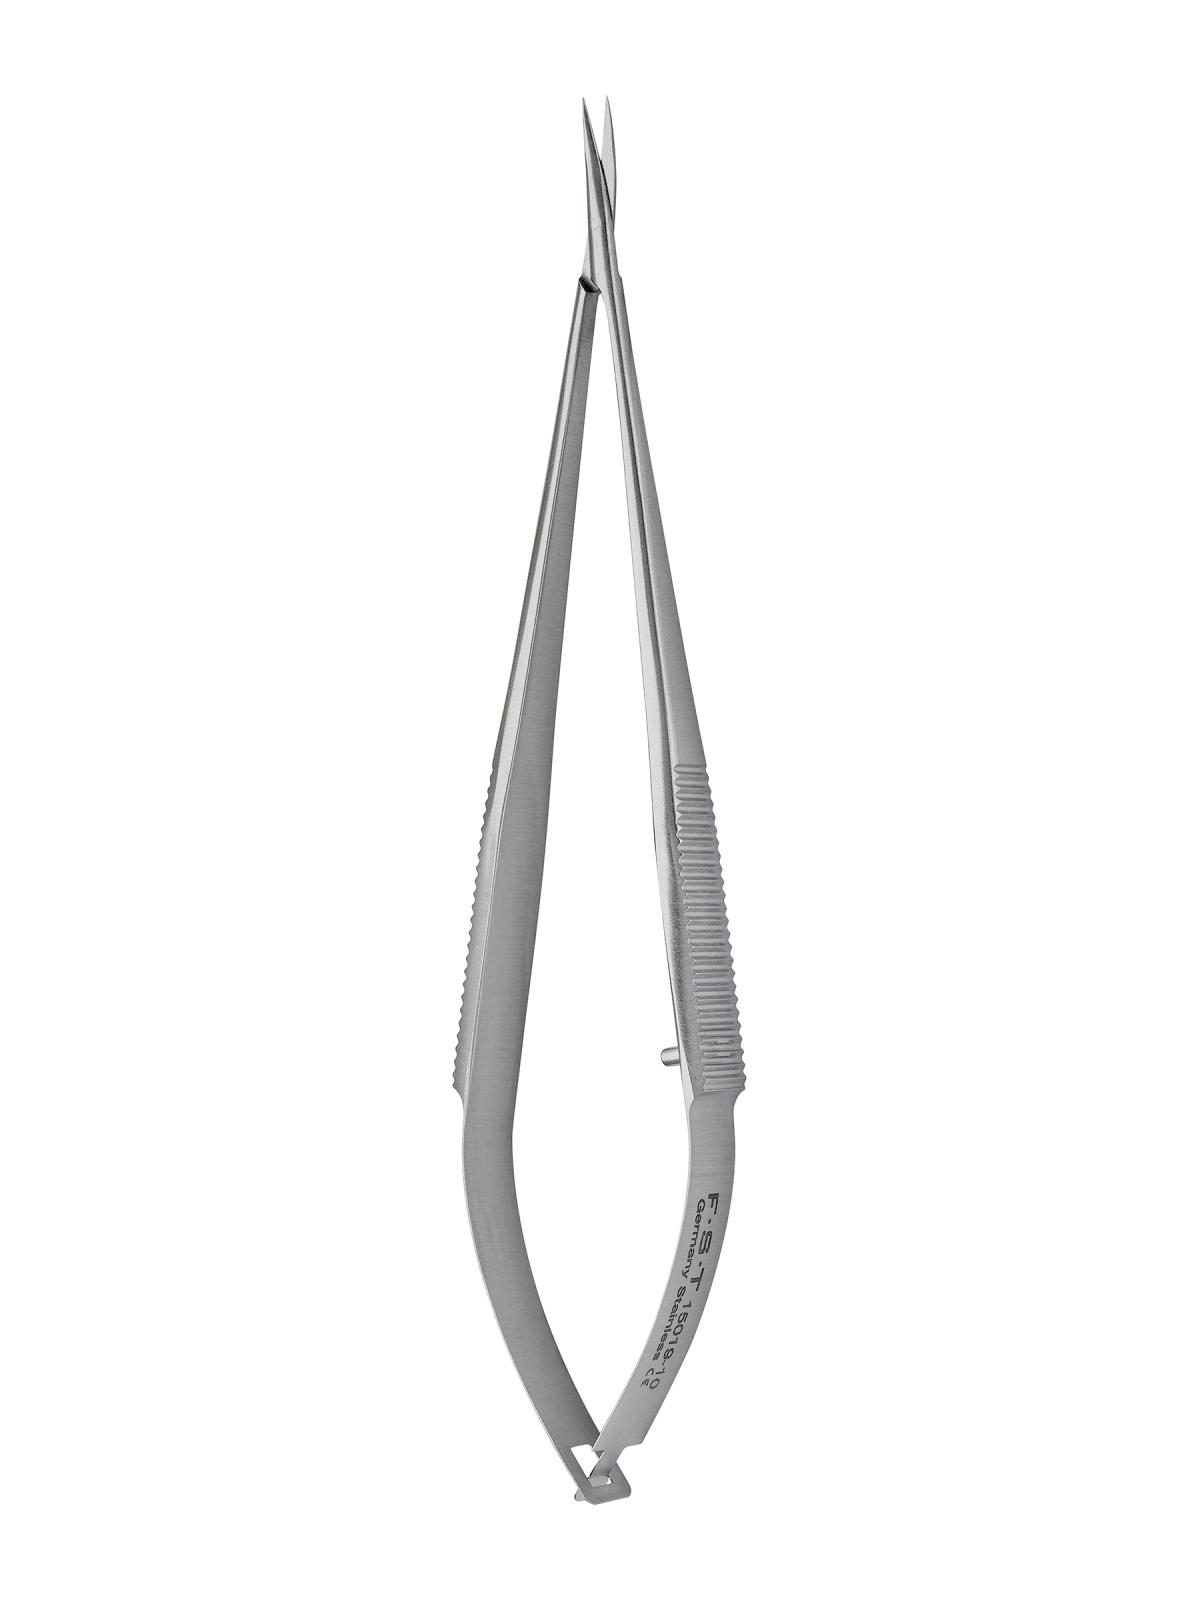 Stainless Steel Curved Micro Spring Scissors